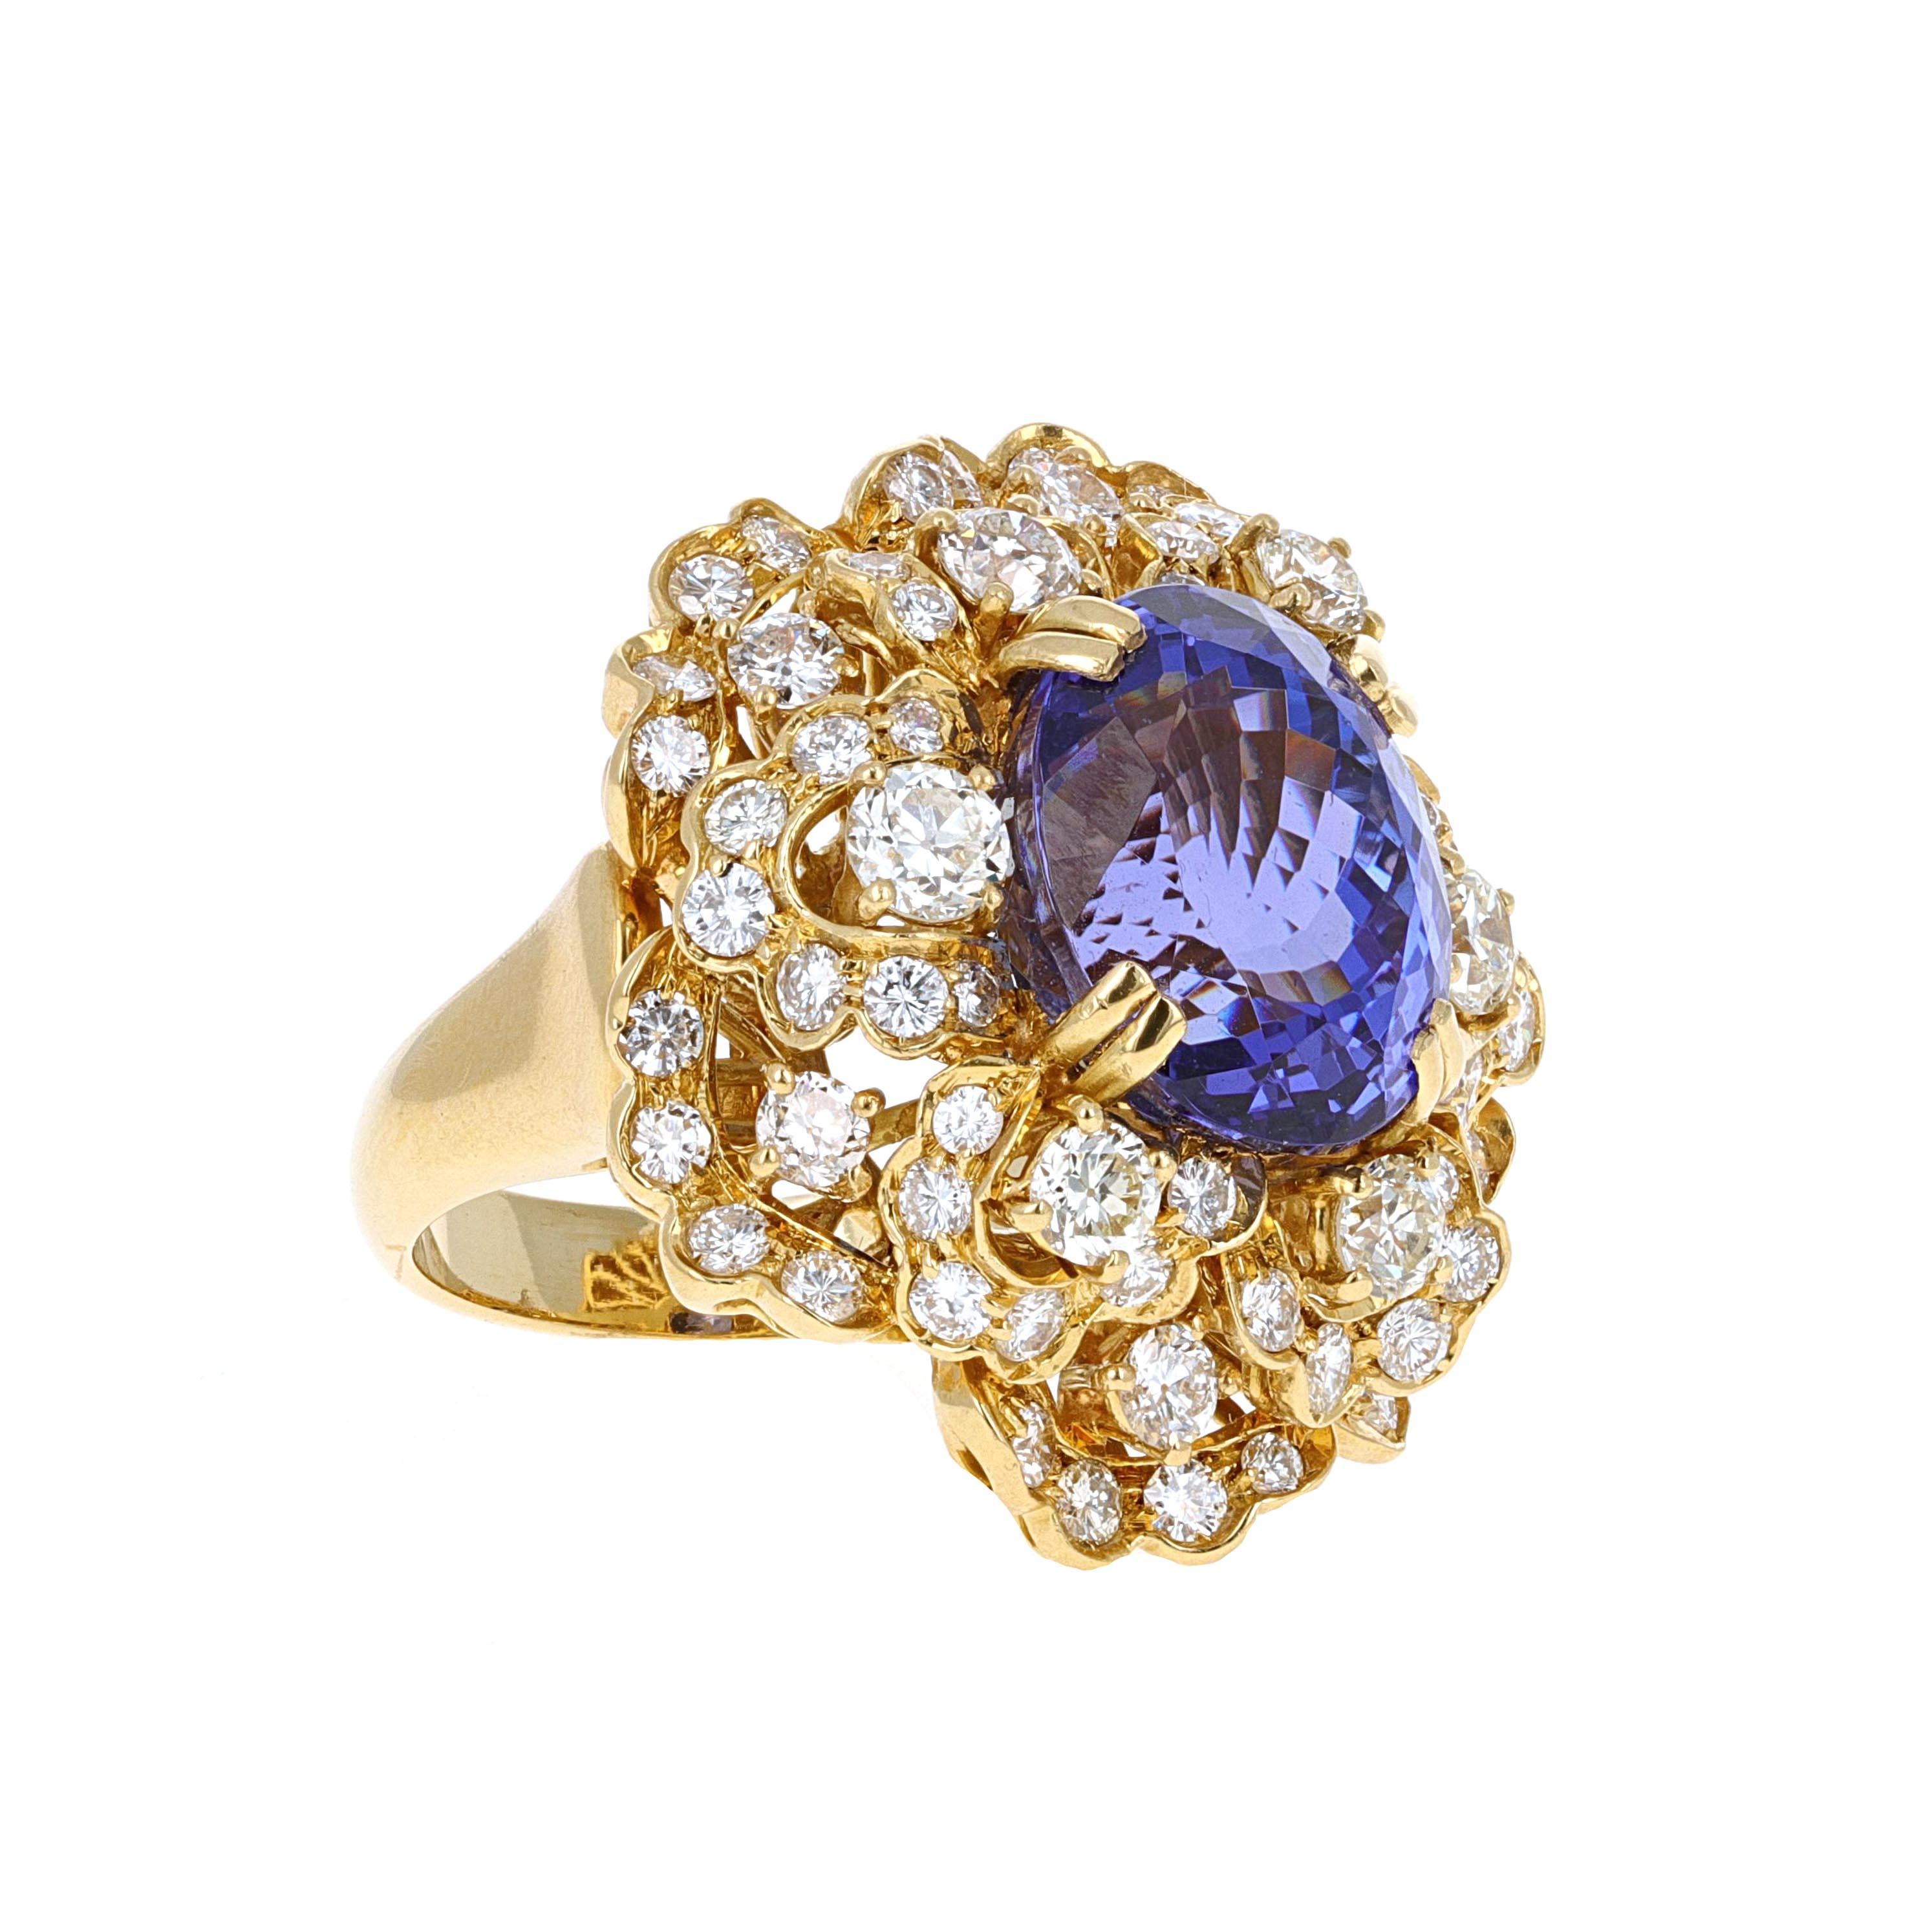 18 karat  yellow gold 12.99 carat Tanzanite and Diamond cocktail ring. The tanzanite is oval shape and a beautiful purplish blue color. The mounting has 72 diamonds weighing an estimated 3.50 carats total weight.
